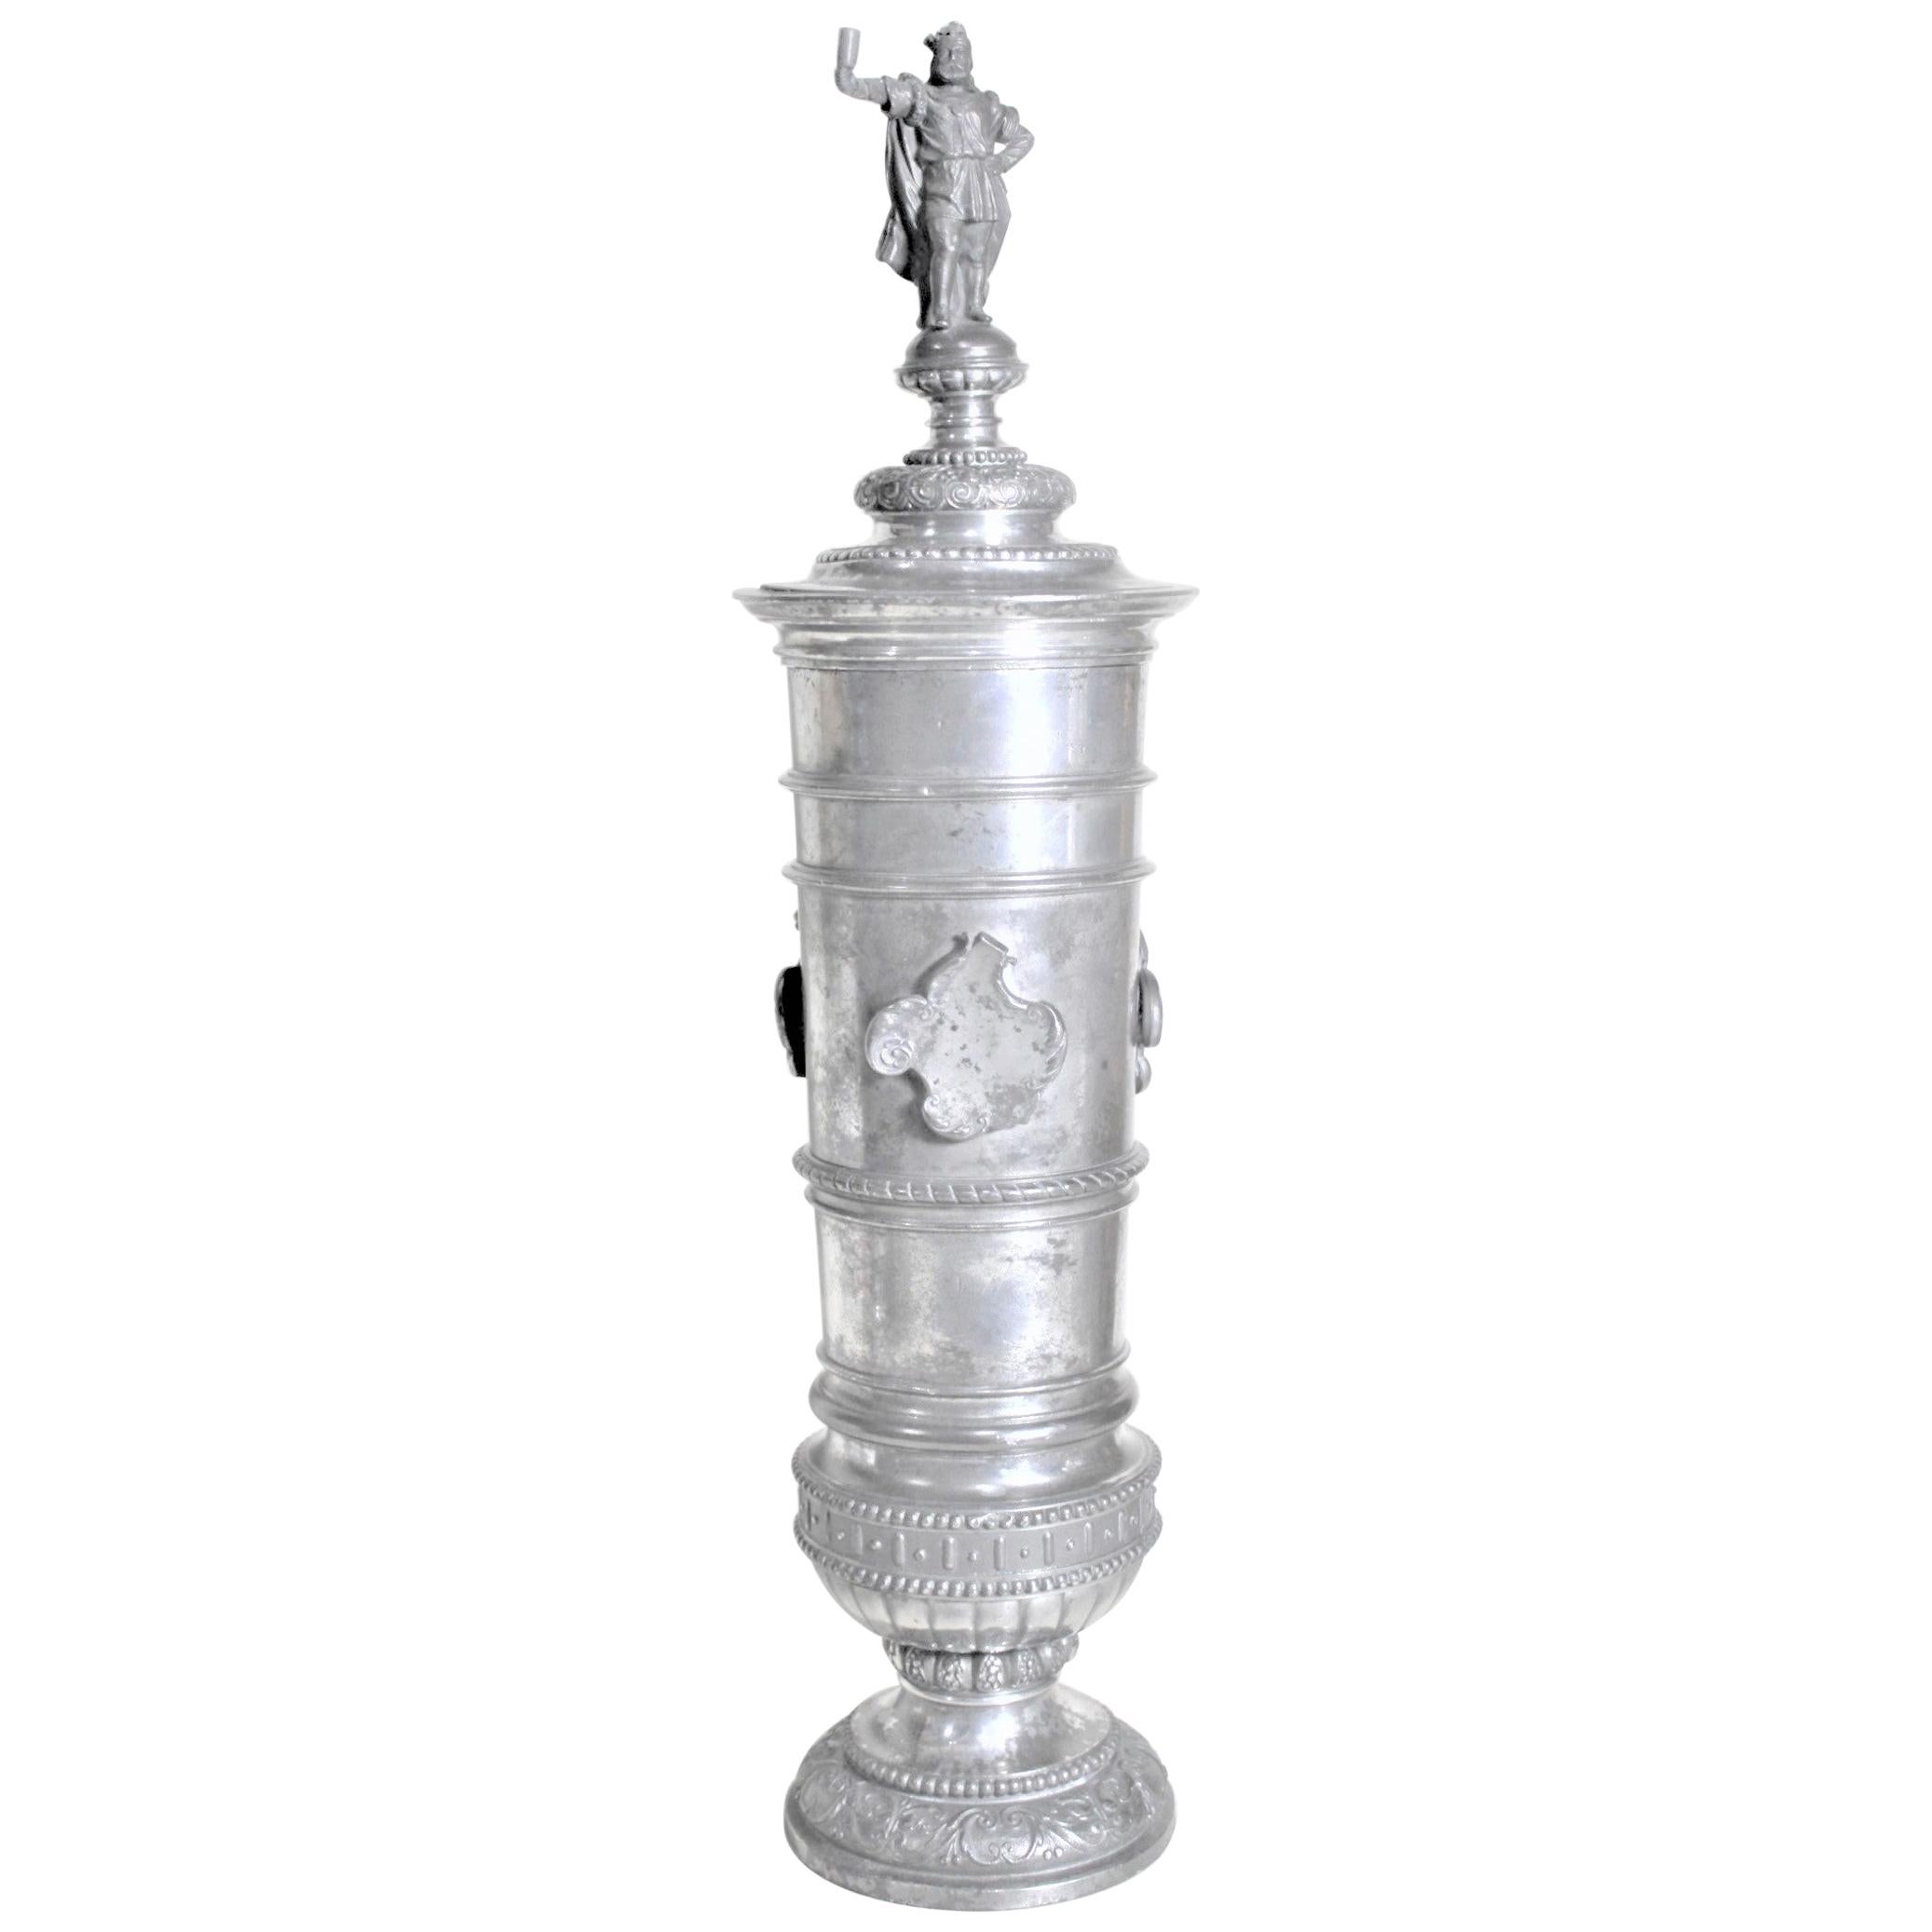 Antique Silver Plated Covered Urn or Chalice with Figural Top 